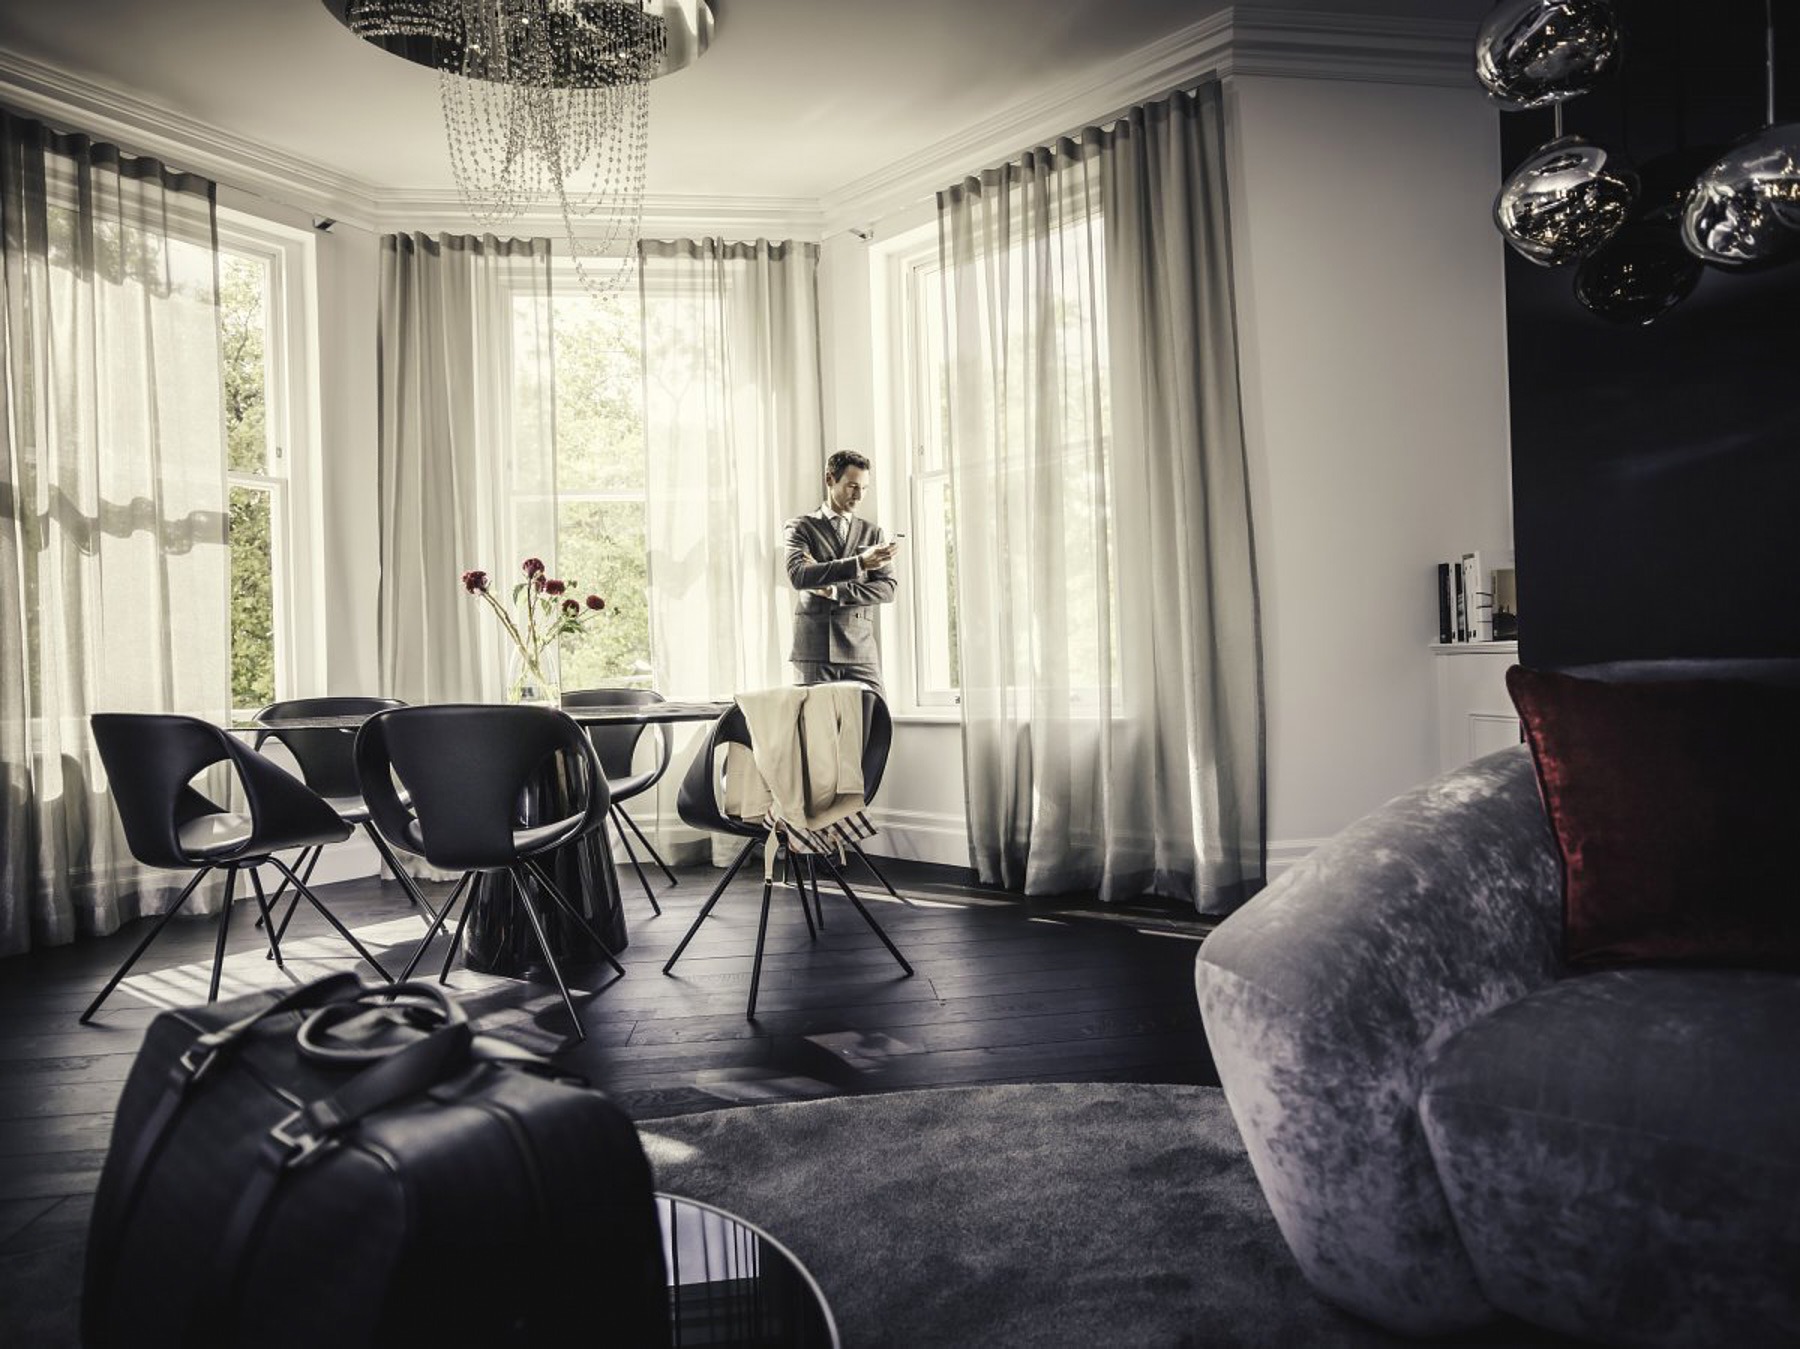 mercedes-benz living @ fraser london campaign (9 images) by Mike Meyer Photography